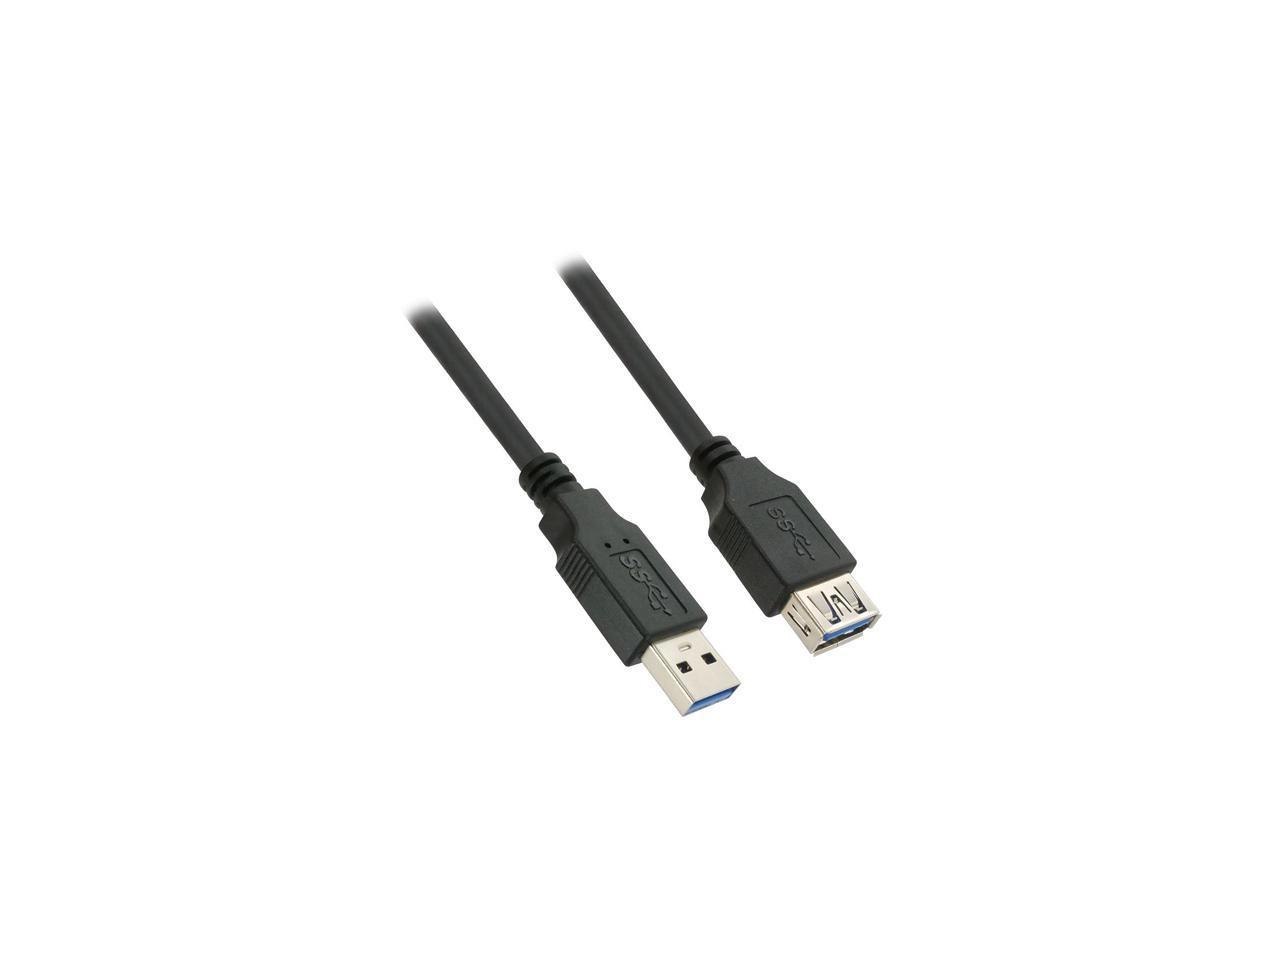 Nippon Labs 50Usb3-Aaf-3-Bk 3 FT. Black Usb 3.0 A Male To A Female Extension Cable